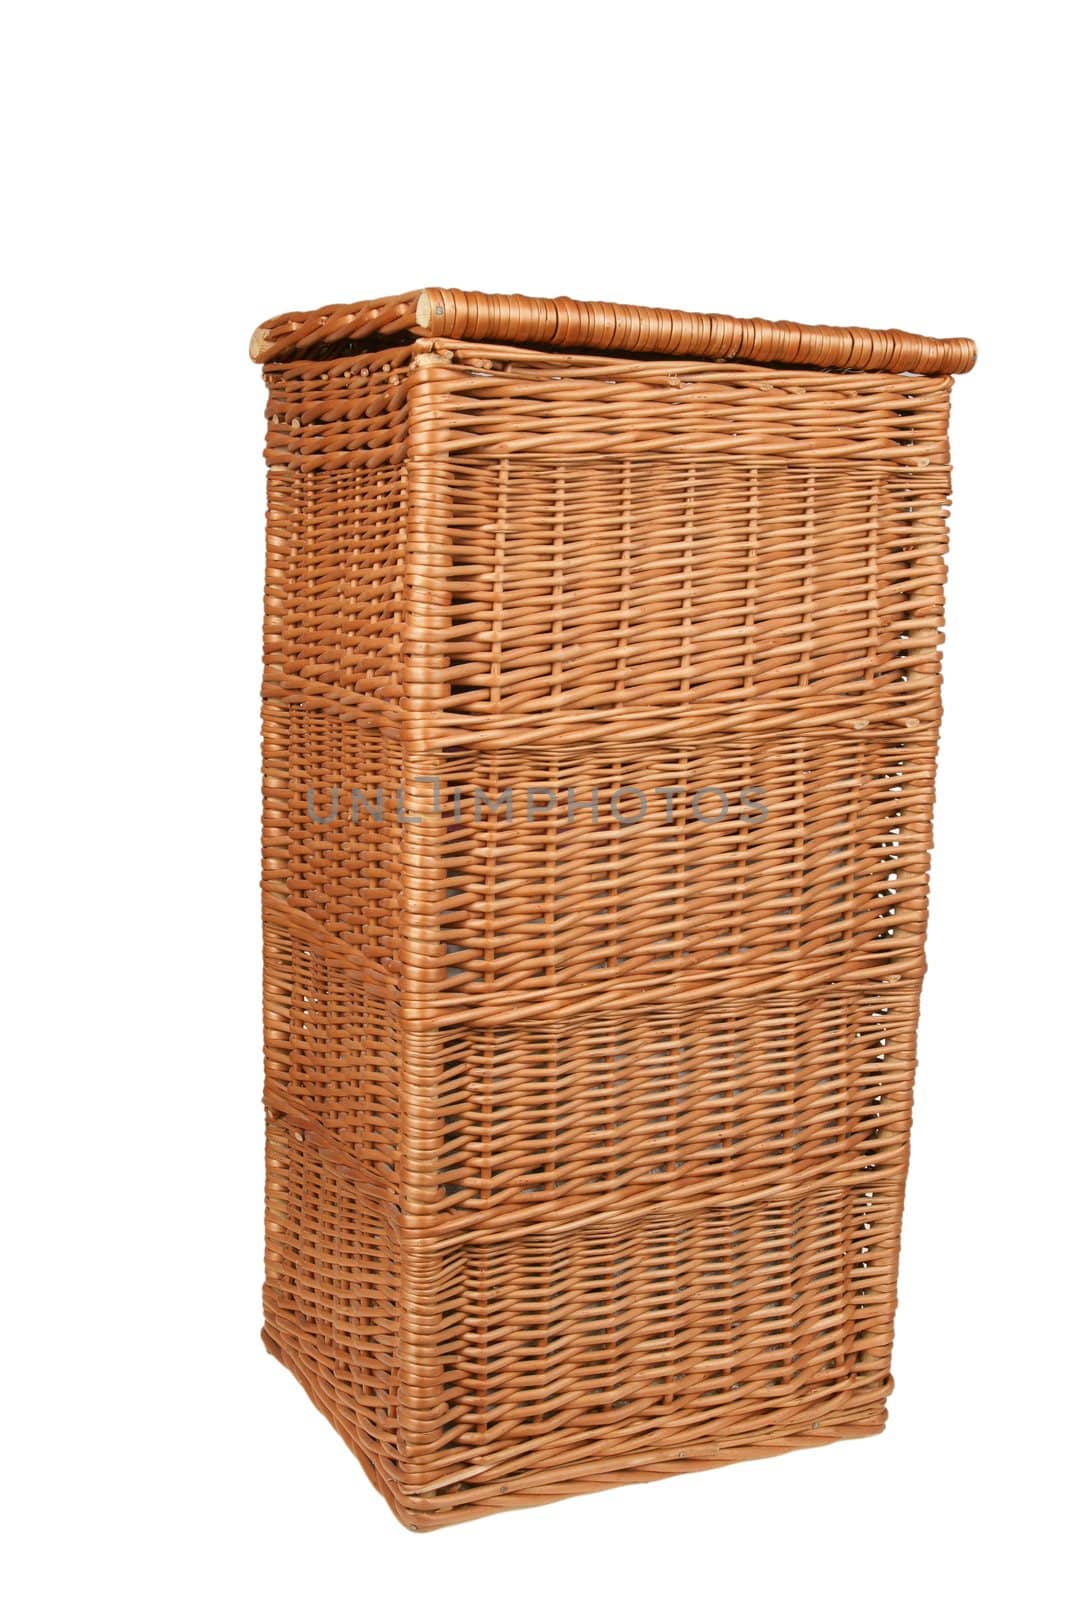 Brown wicker basket isolated on white background close up